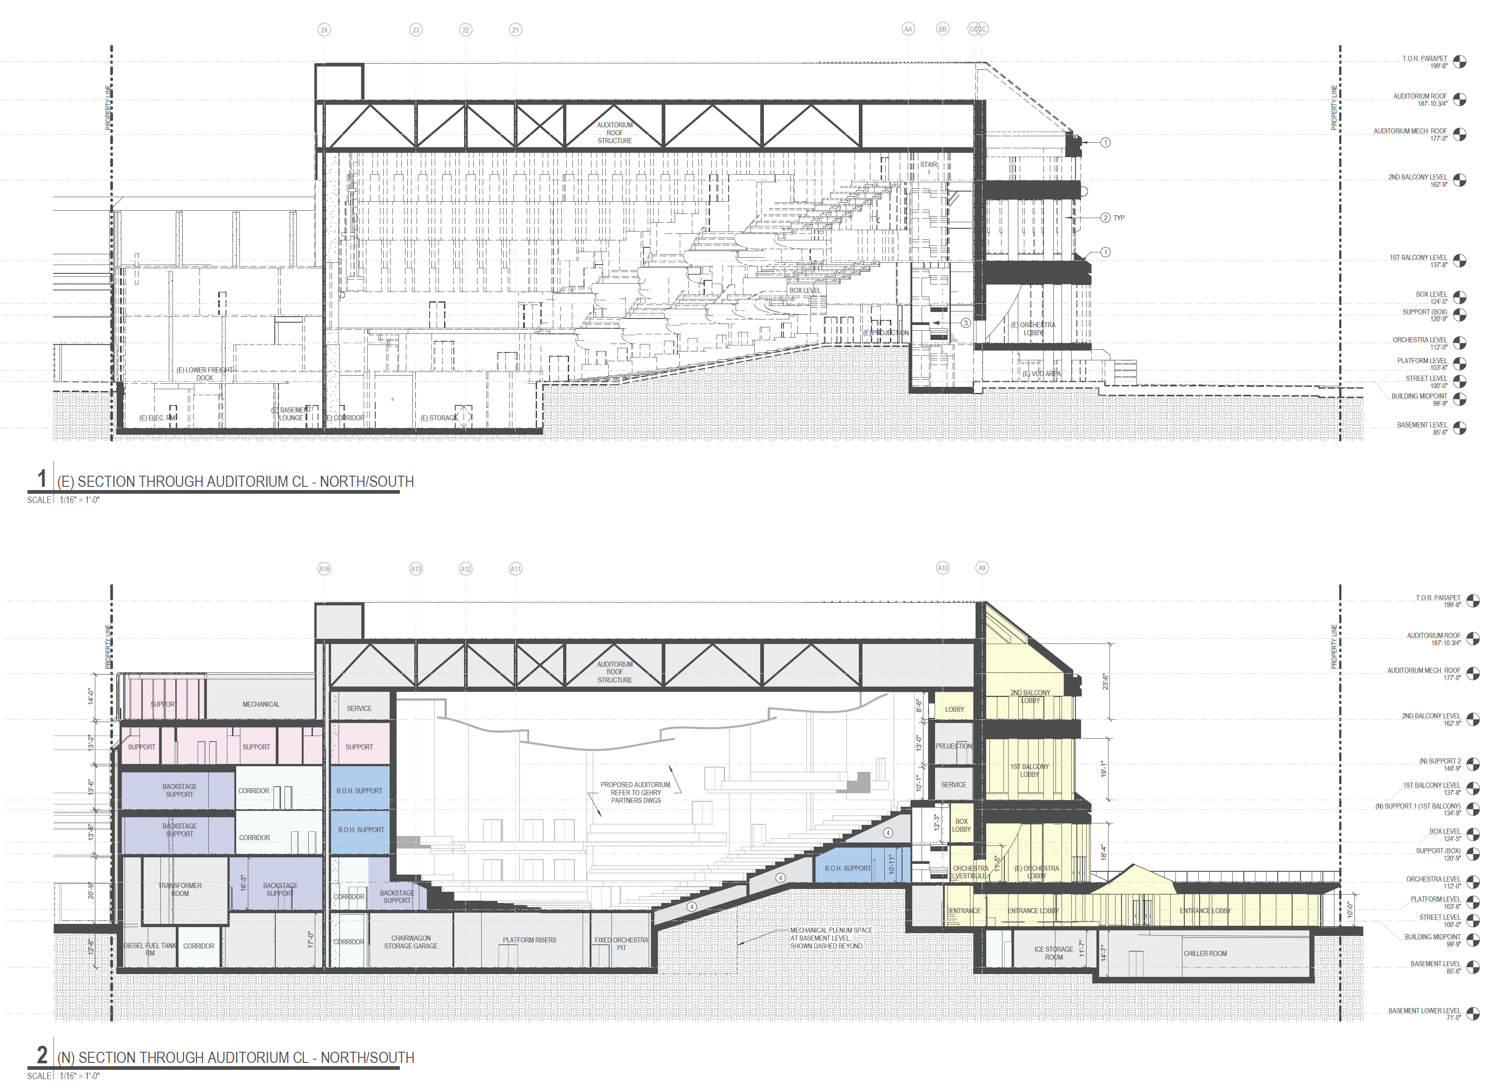 San Francisco Symphony Hall existing (top) and proposed changes (bottom) for the interior concert hall, cross-section illustration by Mark Cavagnero Associates